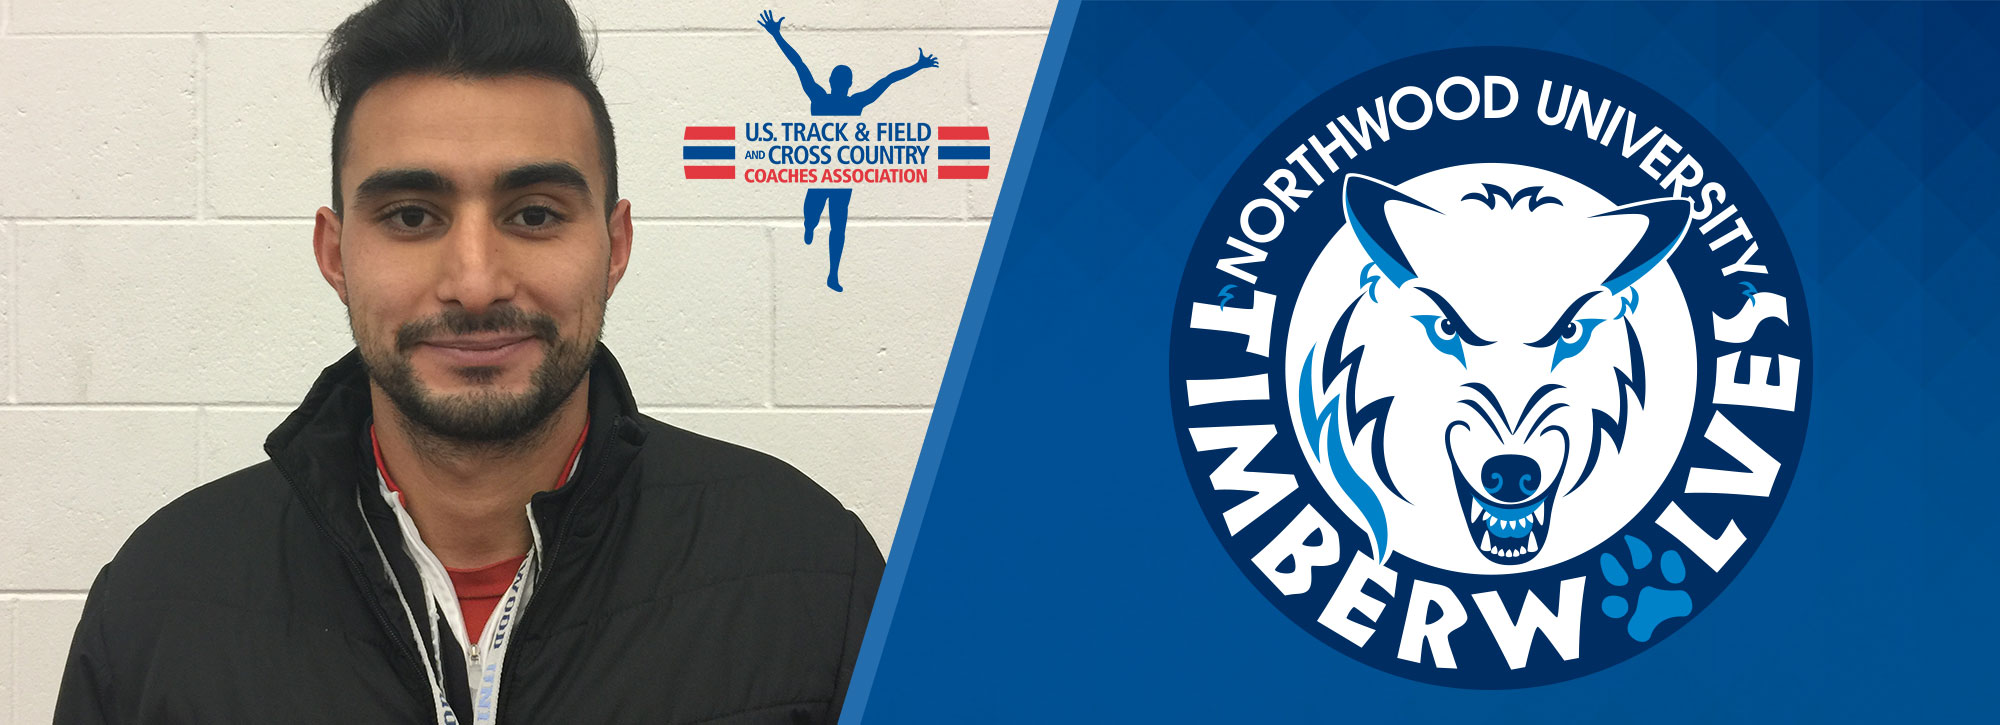 Northwood's Gharsalli Named 2017 USTFCCCA Indoor Scholar Athlete of the Year; 72 Earn All-Academic Accolades